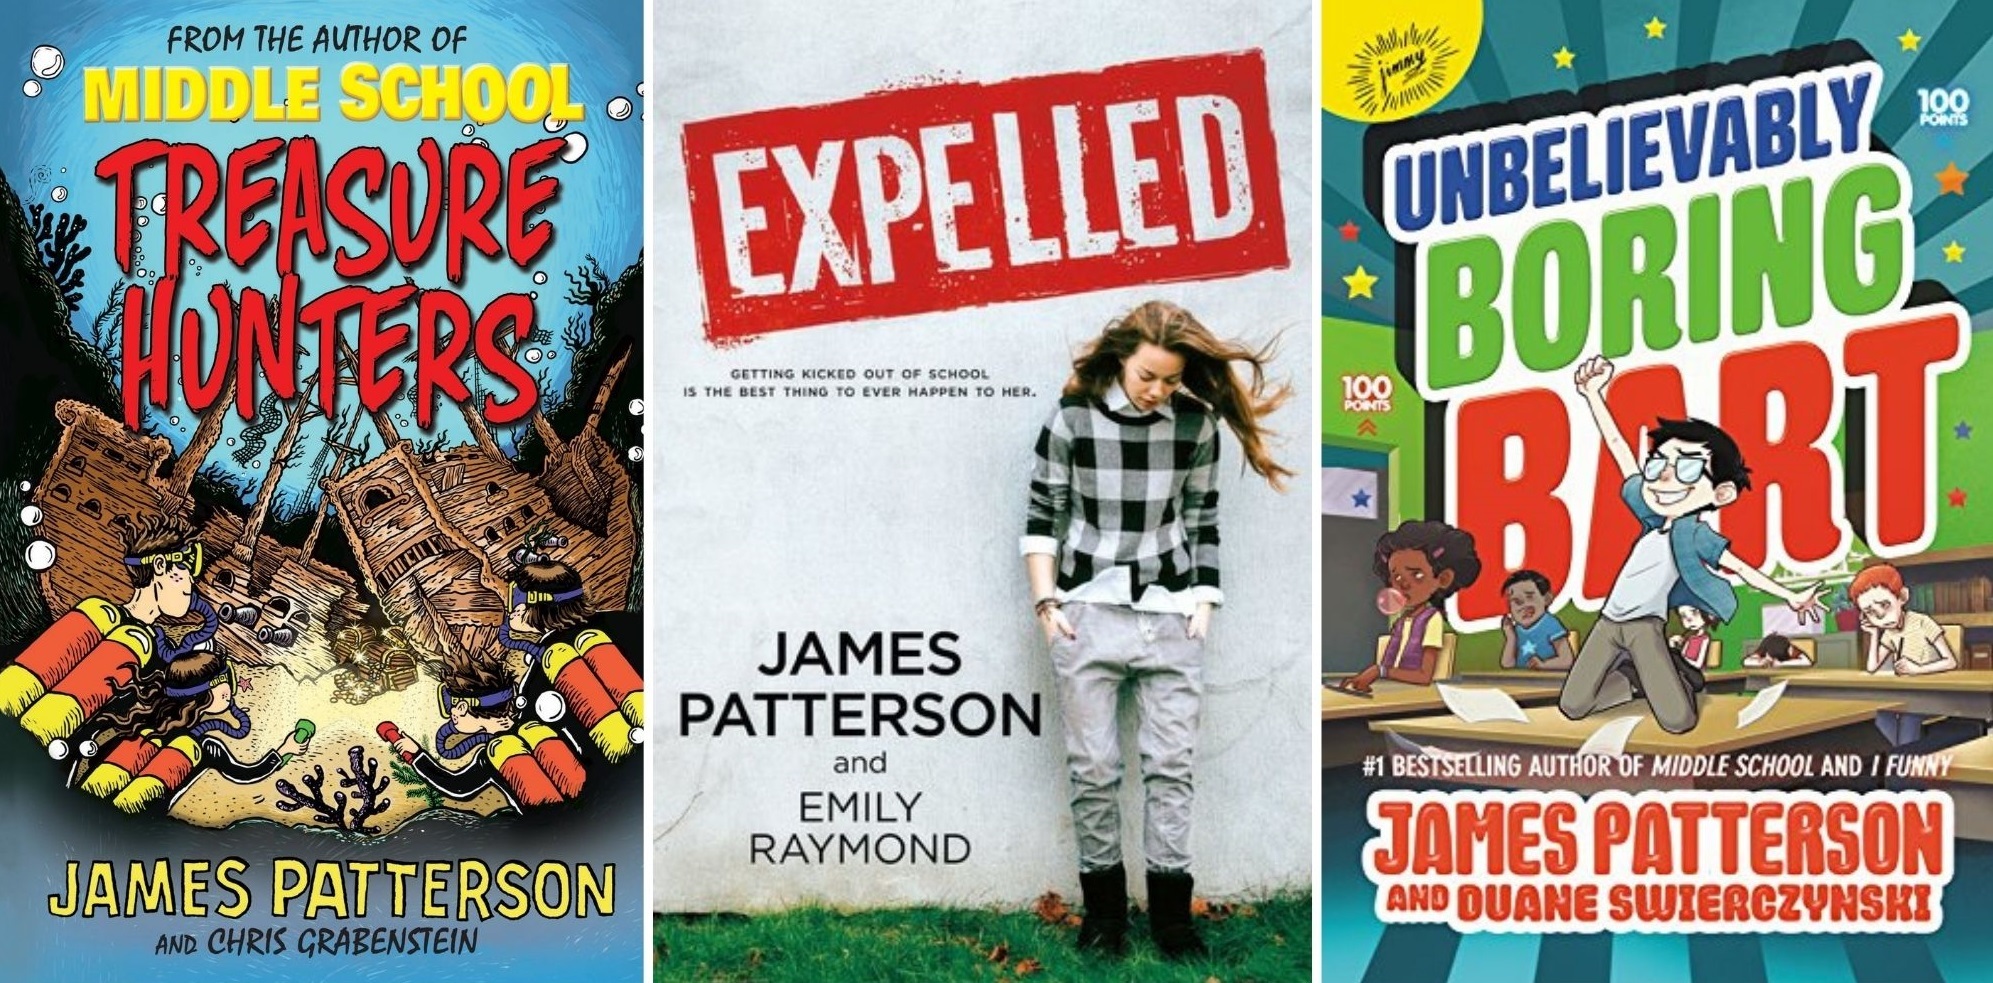 James Patterson titles aimed at younger readers.